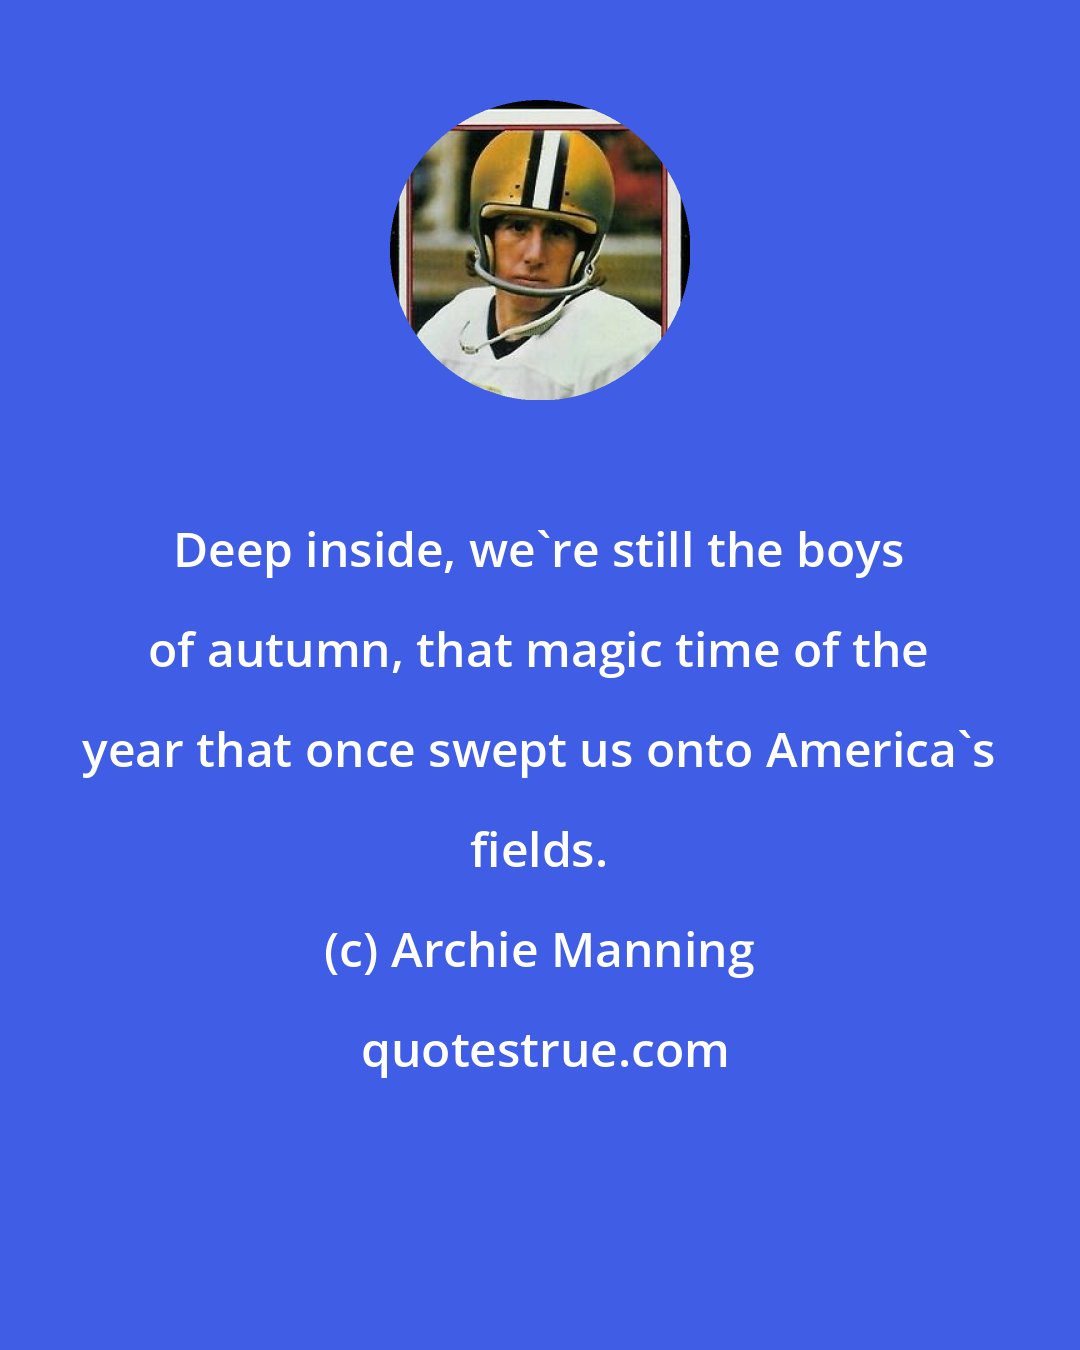 Archie Manning: Deep inside, we're still the boys of autumn, that magic time of the year that once swept us onto America's fields.